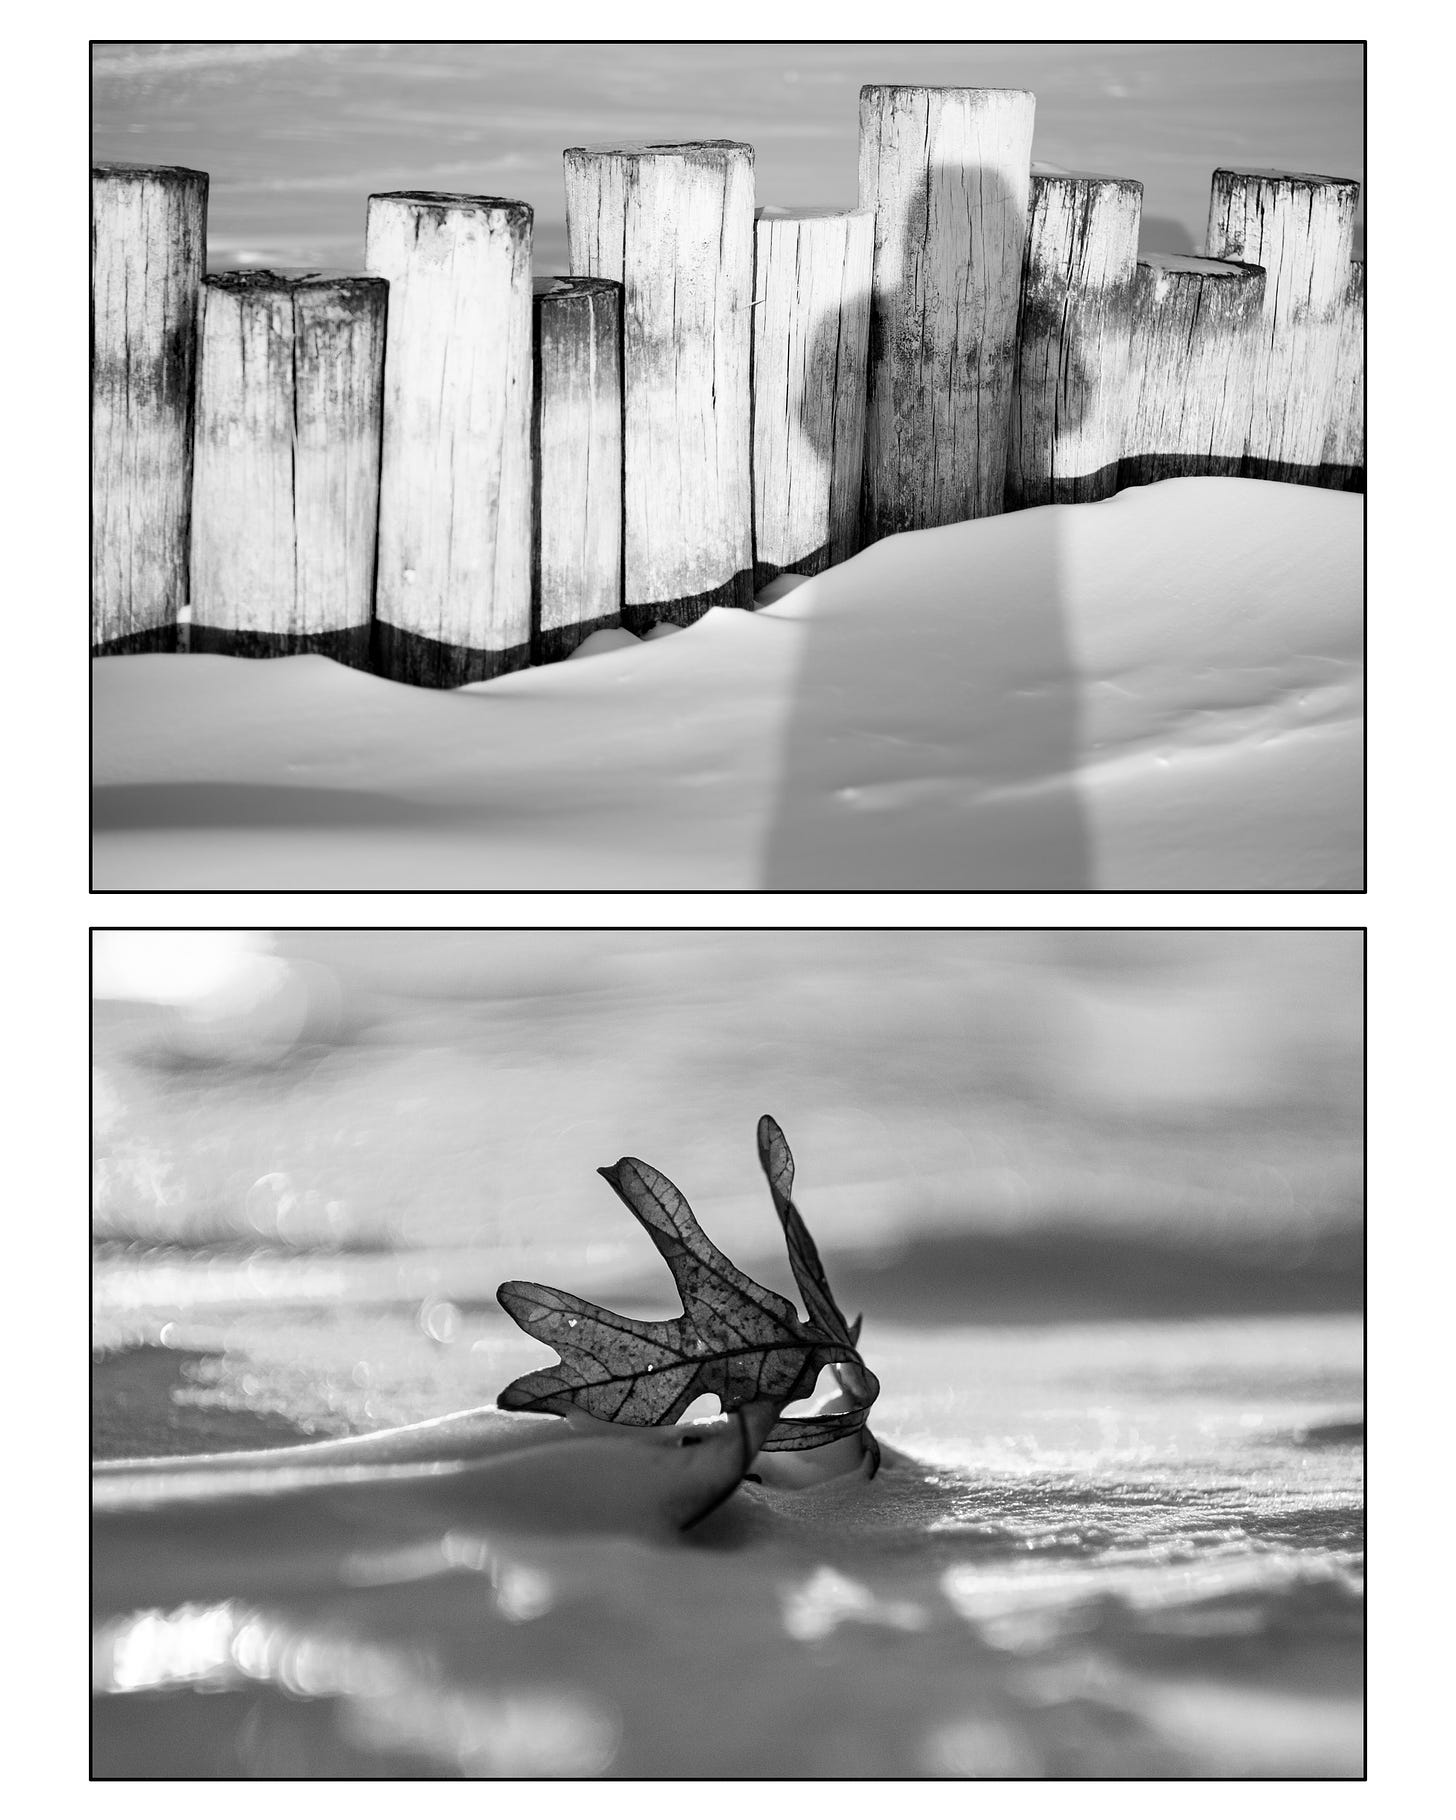 Two pictures are stacked on top of each other. The top photos shows the shadow of the photographer within the scene containing a group of wooden posts in the lakeshore. The bottom photo shows a fallen leaf emerging through the frozen park grounds.